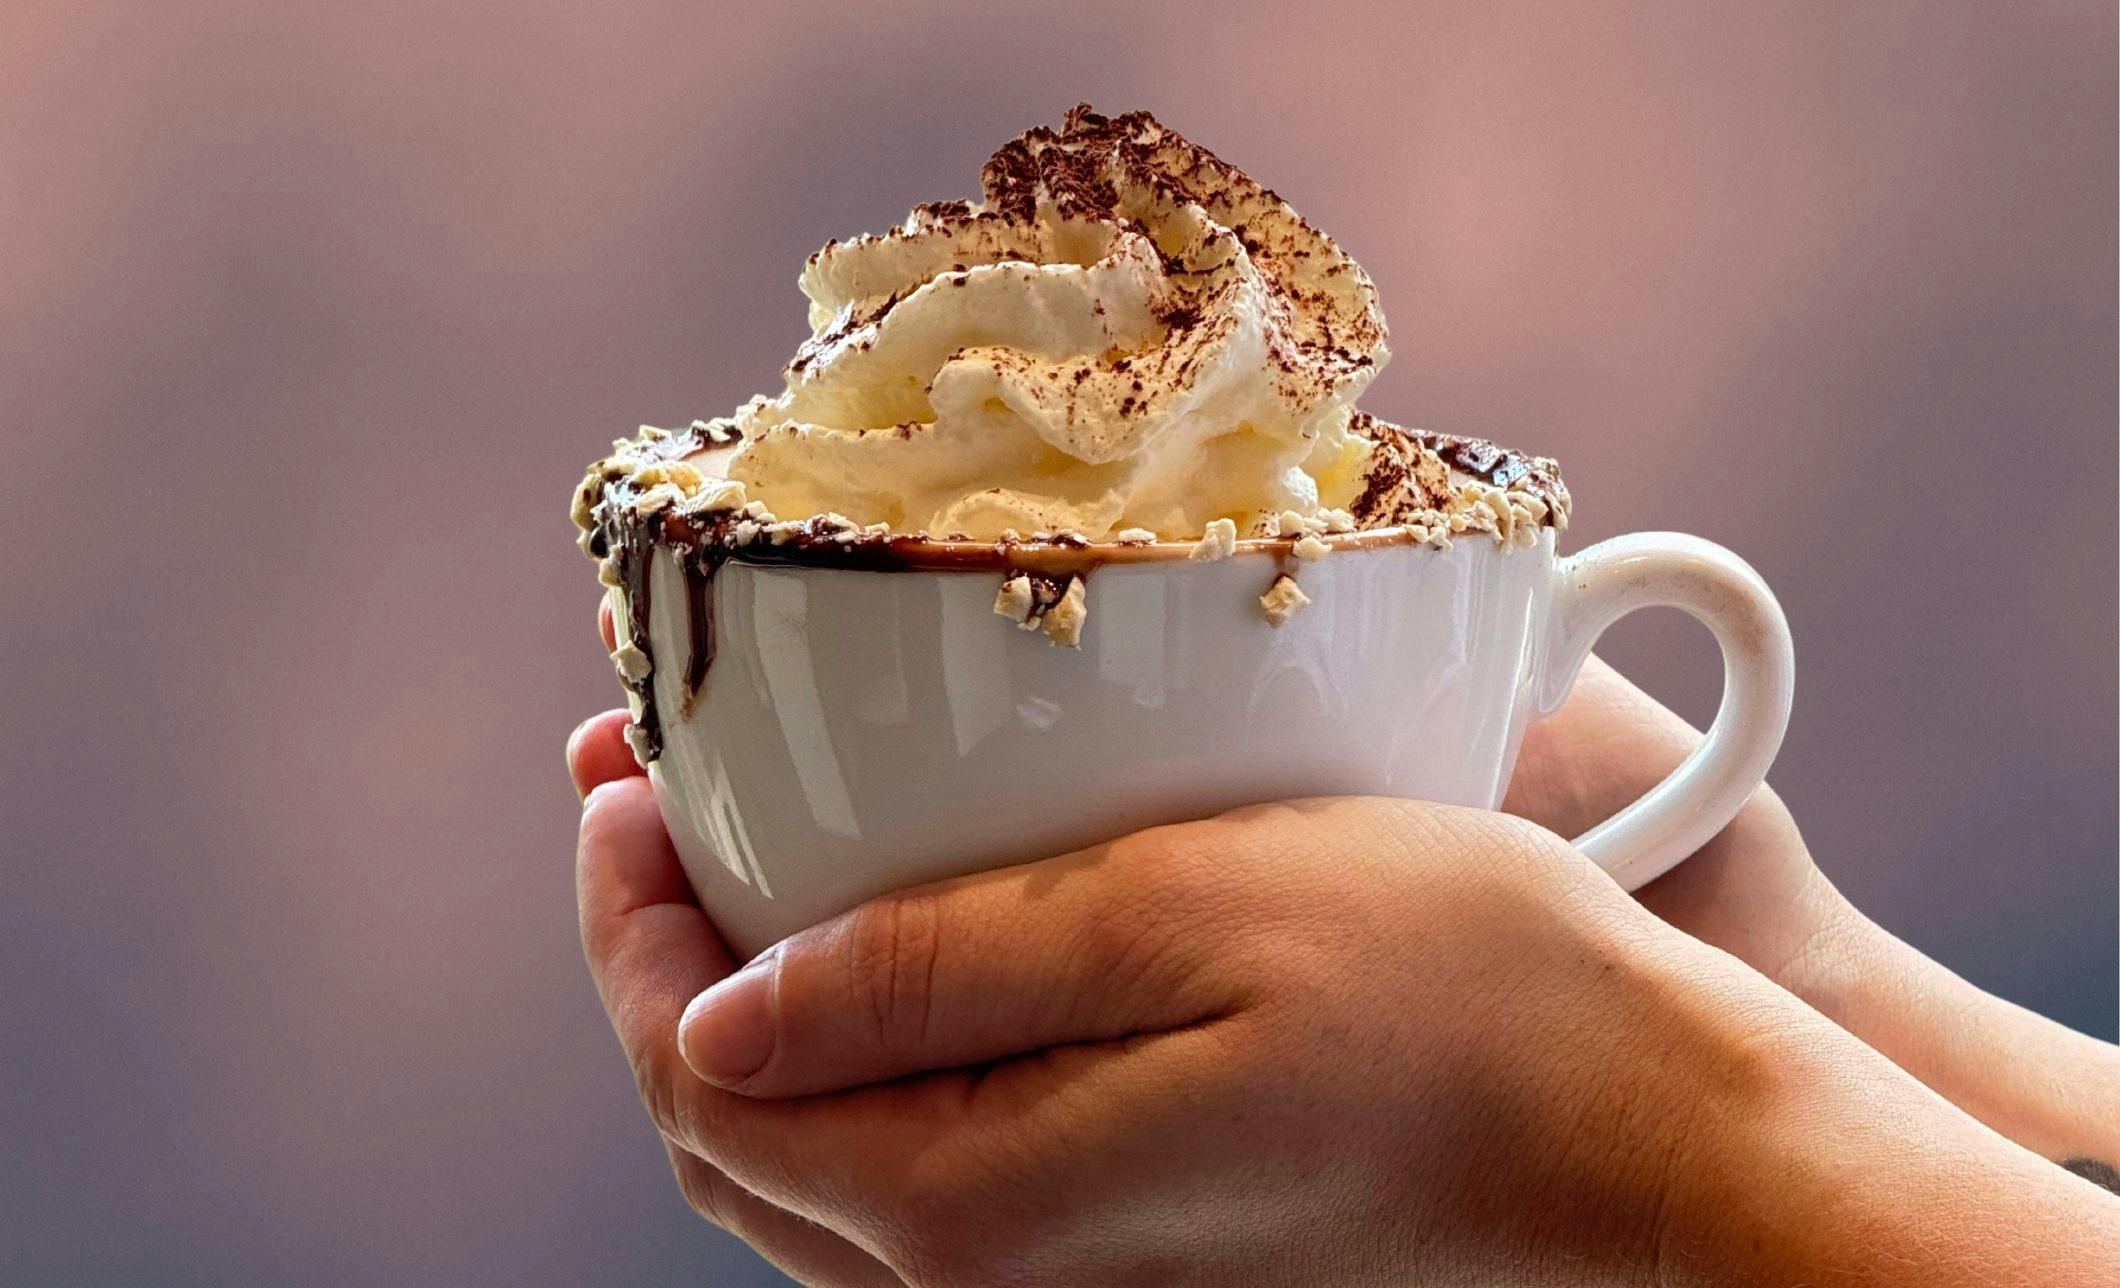 A hot chocolate with whipped cream sits in a person's hands at the Rimrock Resort Hotel in Banff National Park.